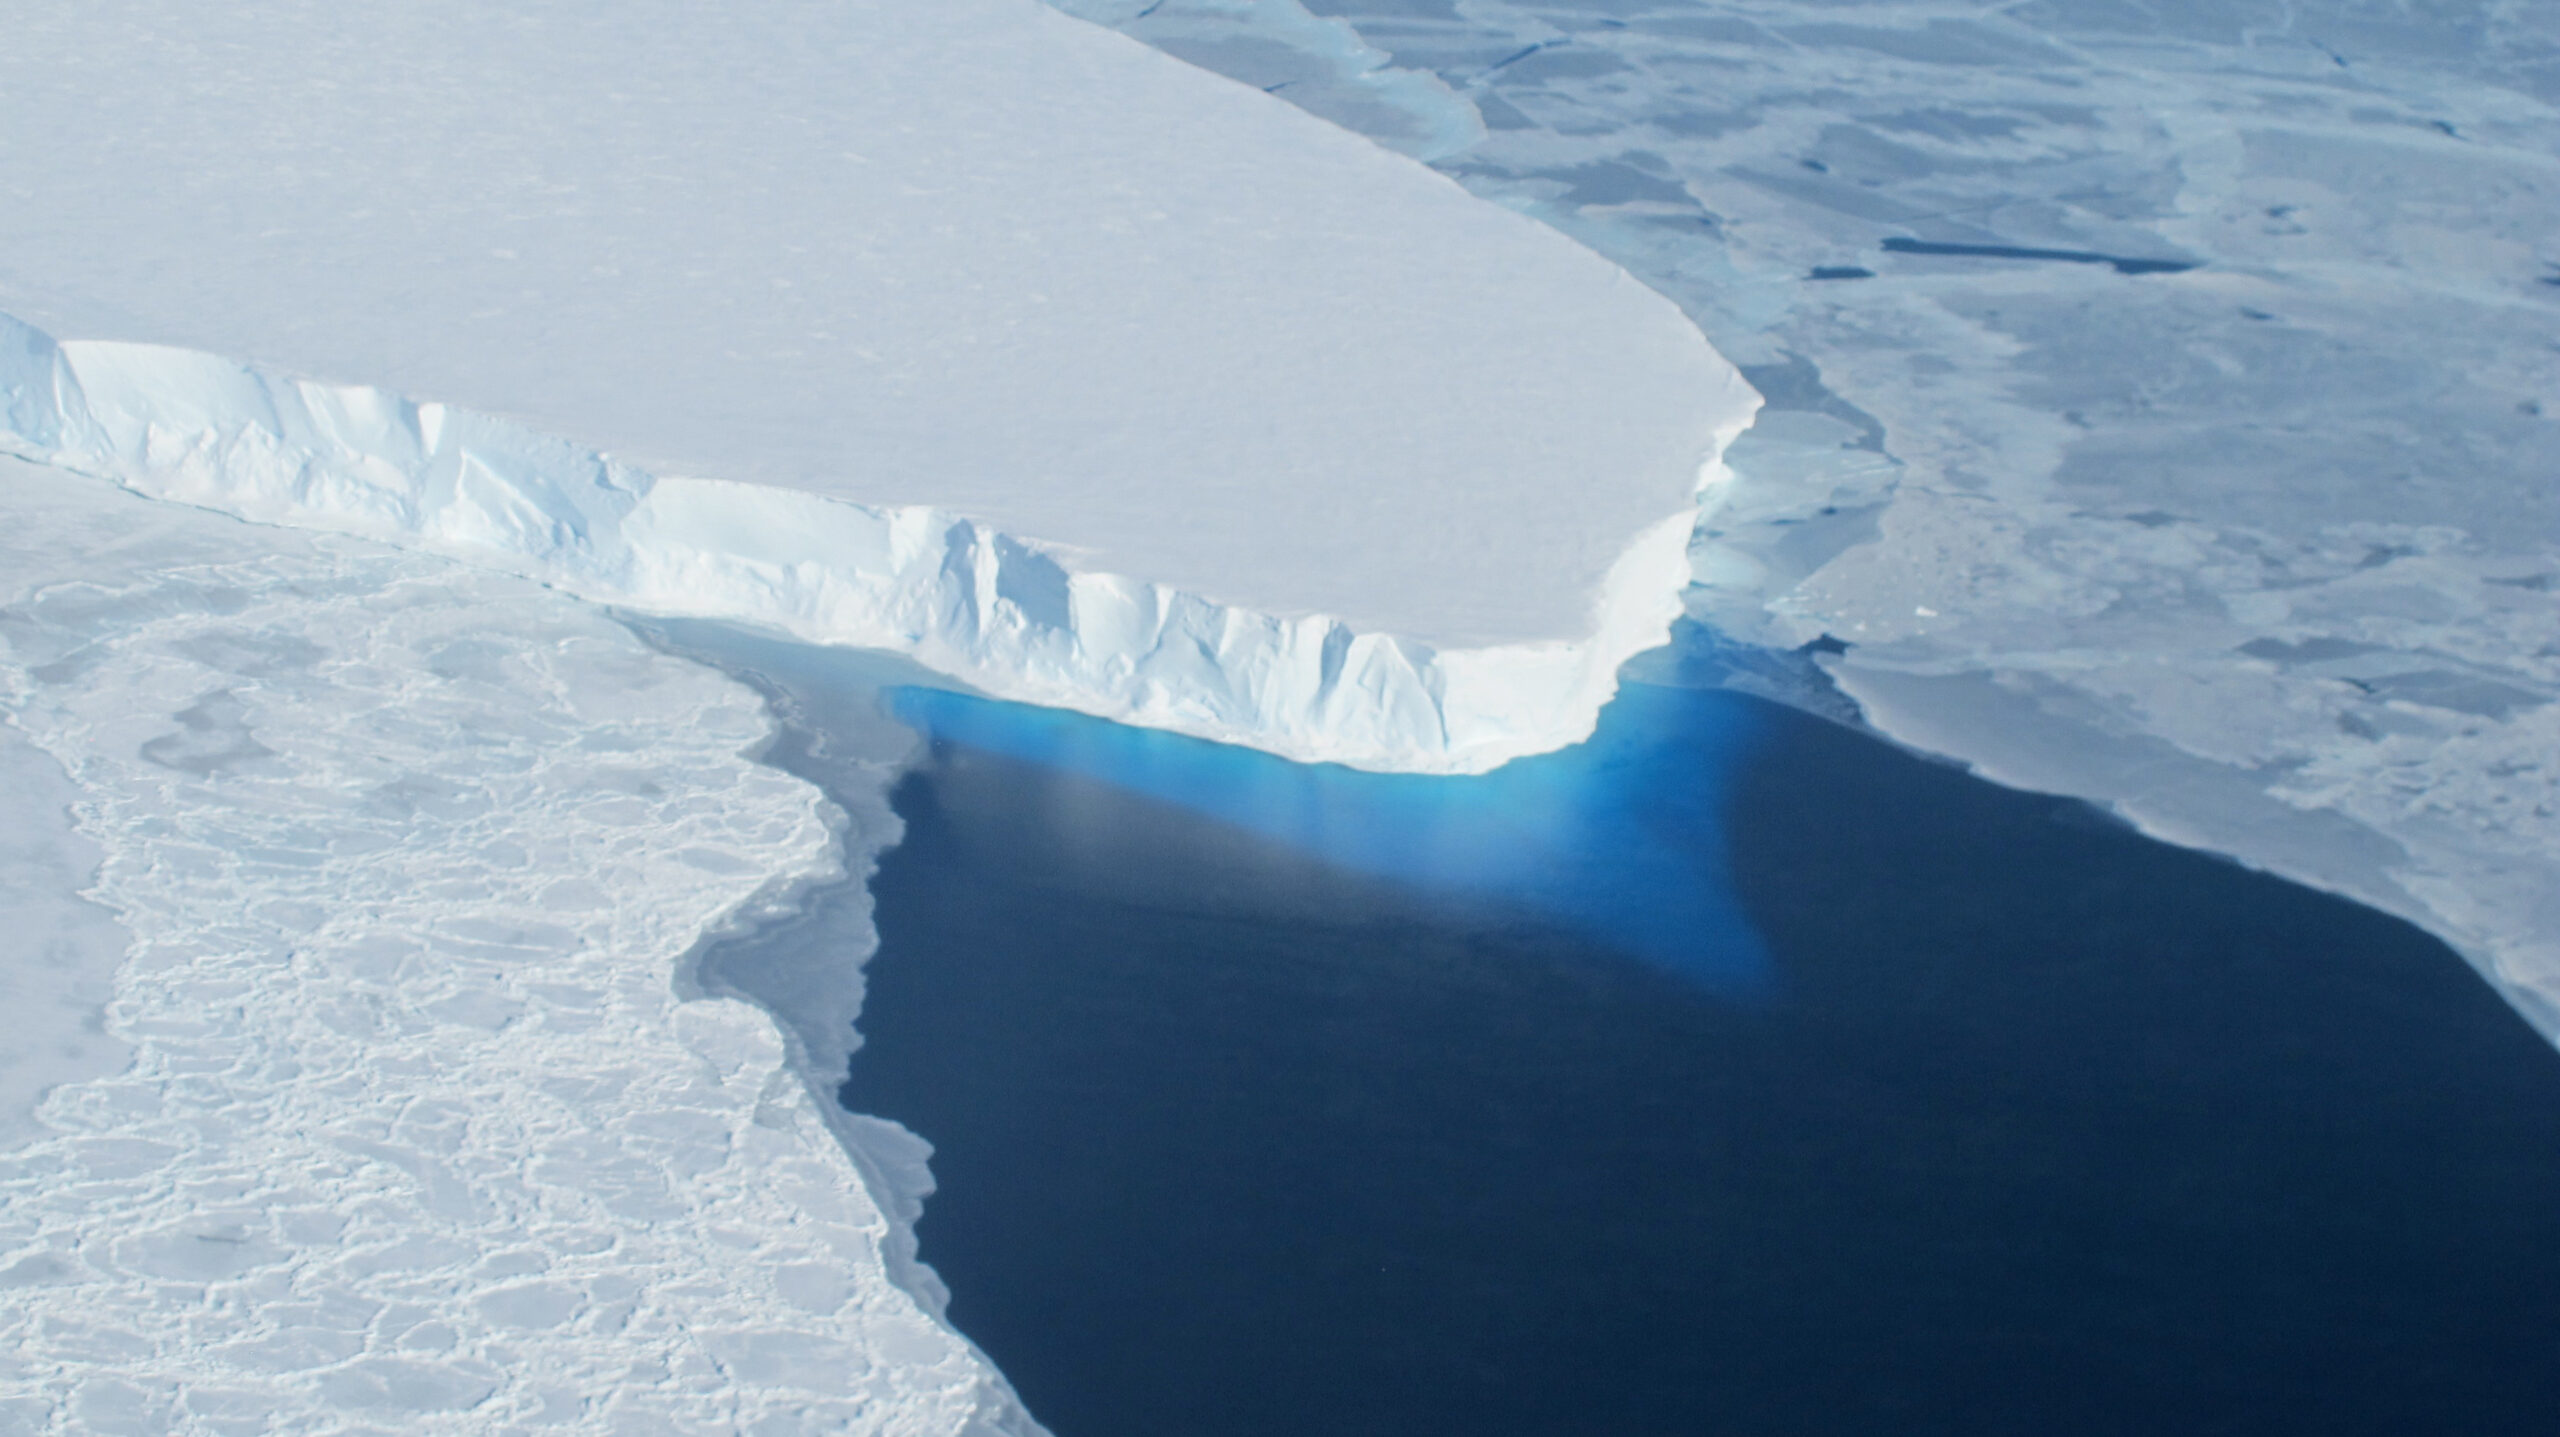 Scientists explain melting of Antarctic ice sheet dating back 9,000 years